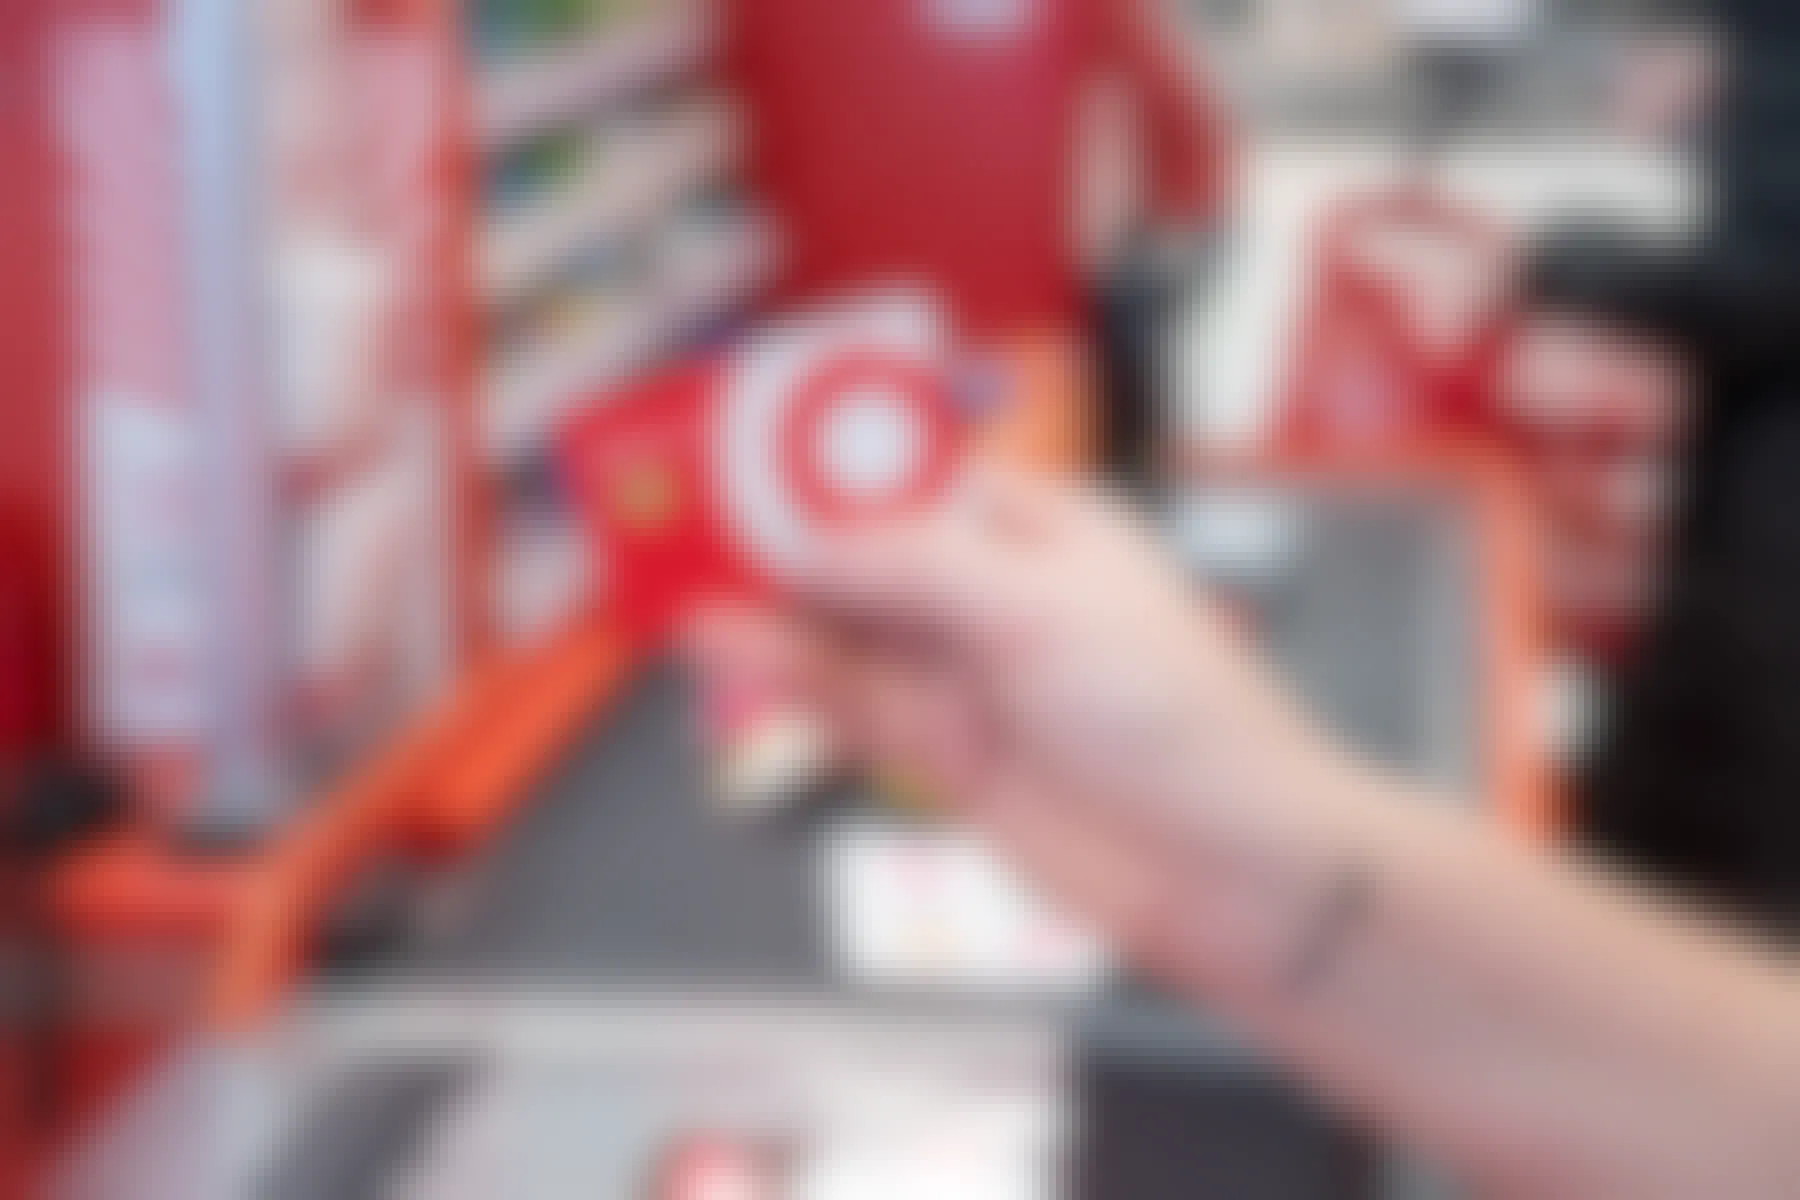 A person's hand holding a Target RedCard up in front of the checkout lane at Target.